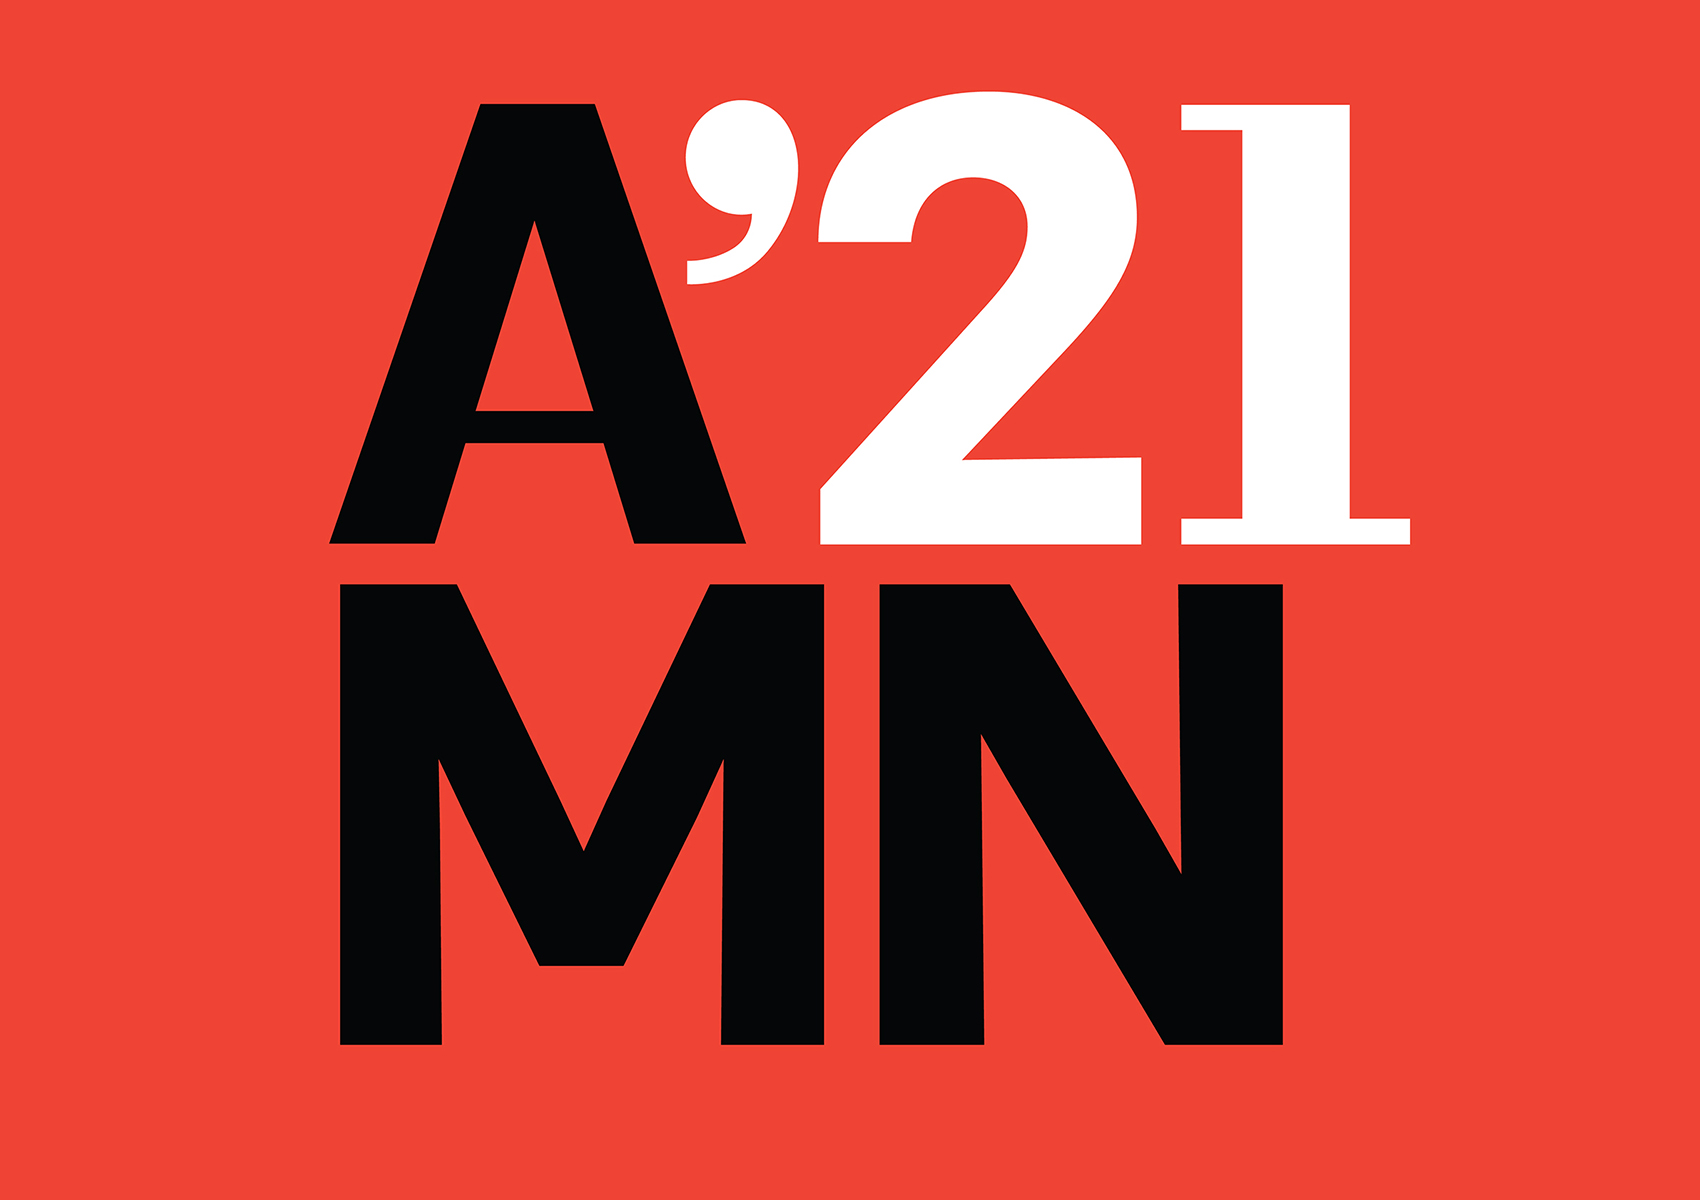 A’21 MN – The Minnesota Conference on Architecture: Day 3